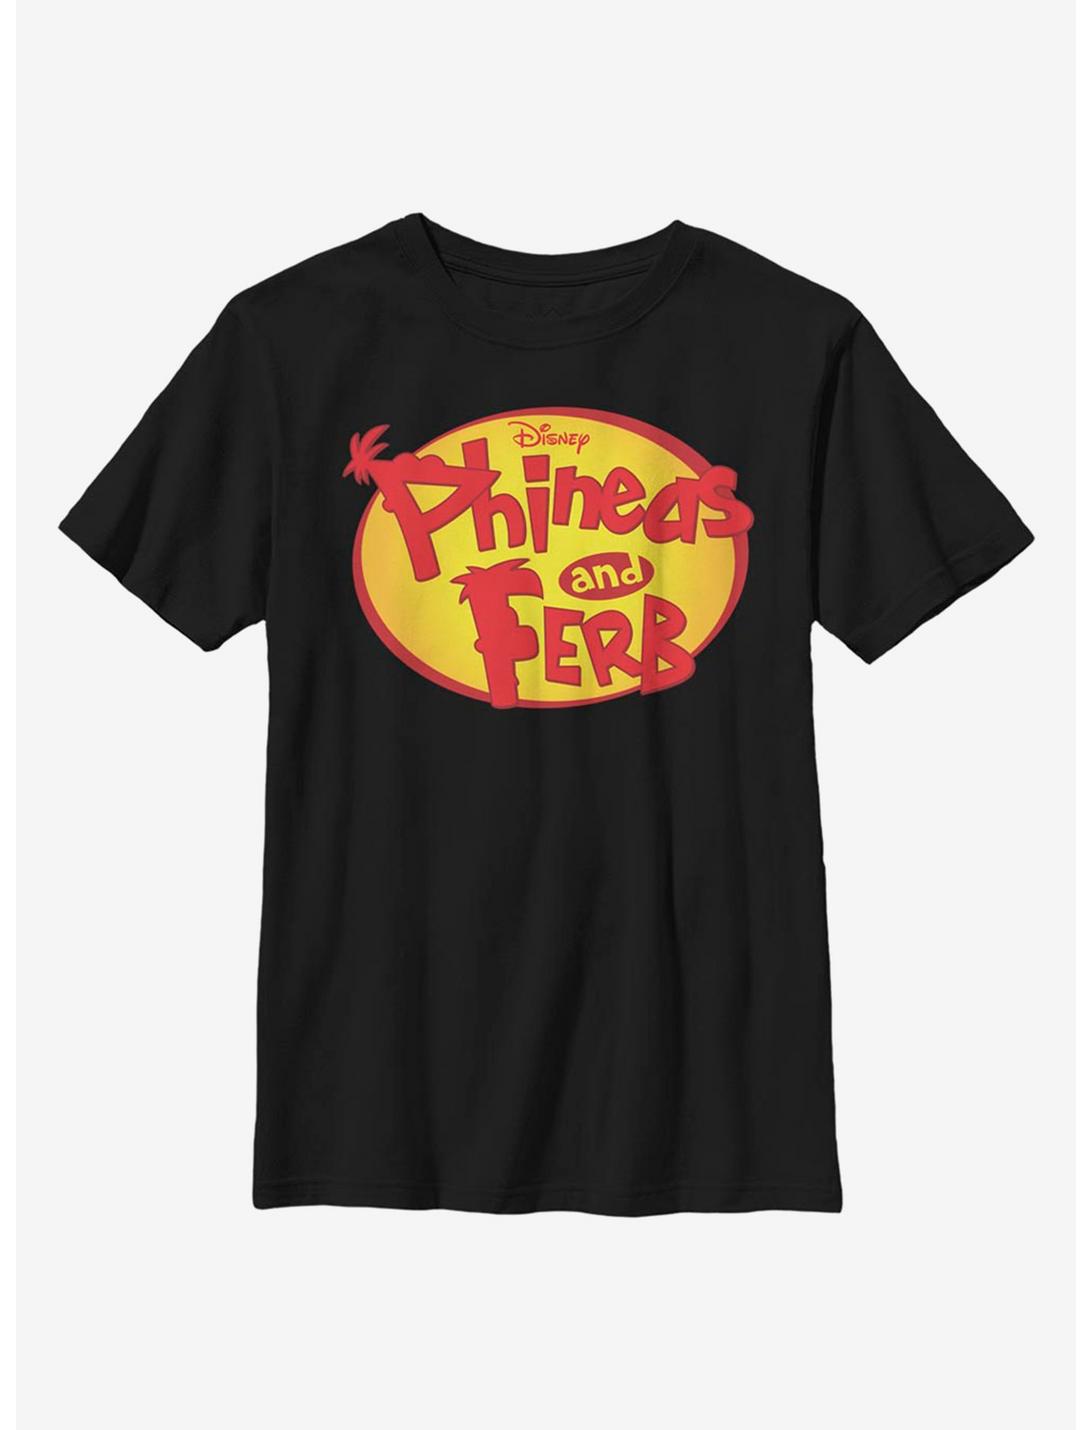 Disney Phineas And Ferb Oval Logo Youth T-Shirt, BLACK, hi-res